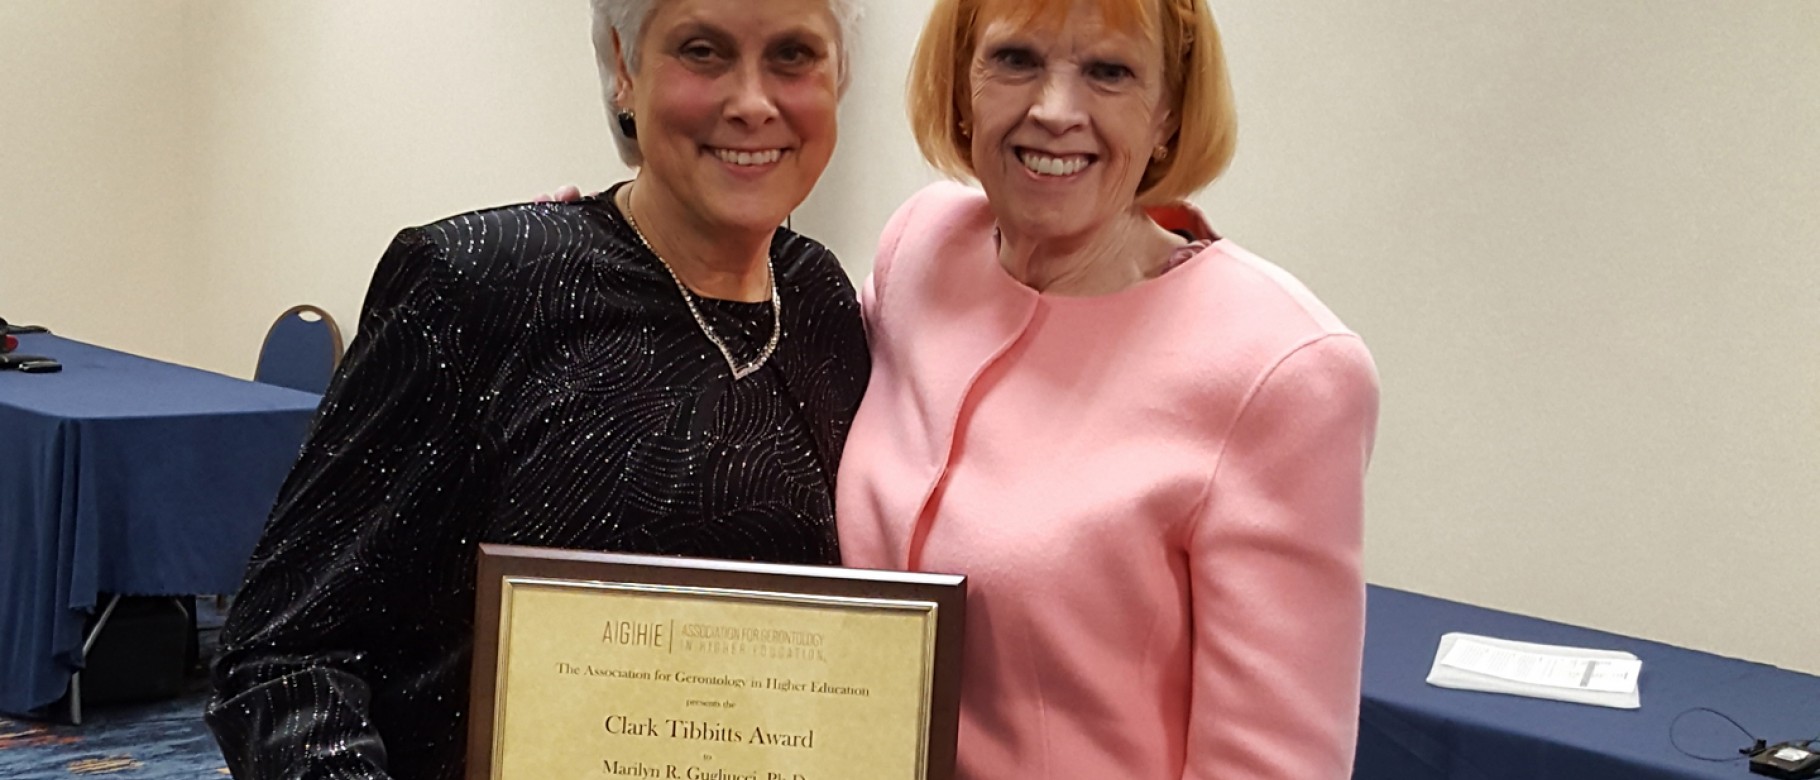 Marilyn Gugliucci (left) poses with Betsy Sprouse, the lead nominator for the Tibbitts Award, which Gugliucci received at the an